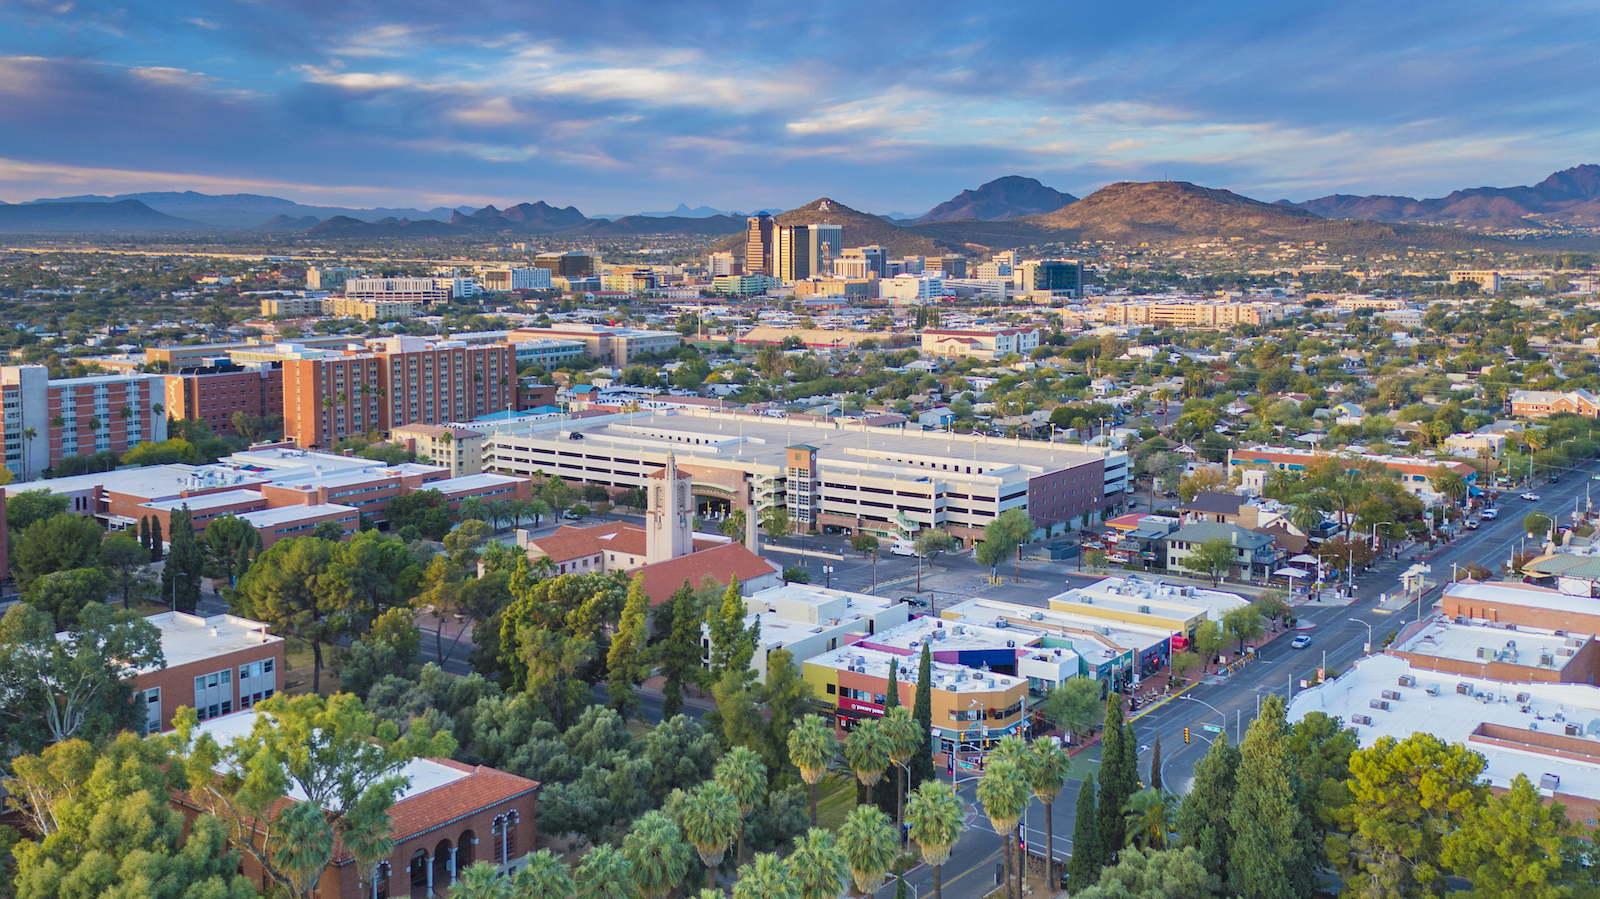 An aerial view of the University of Arizona in Tucson from Getty Images.